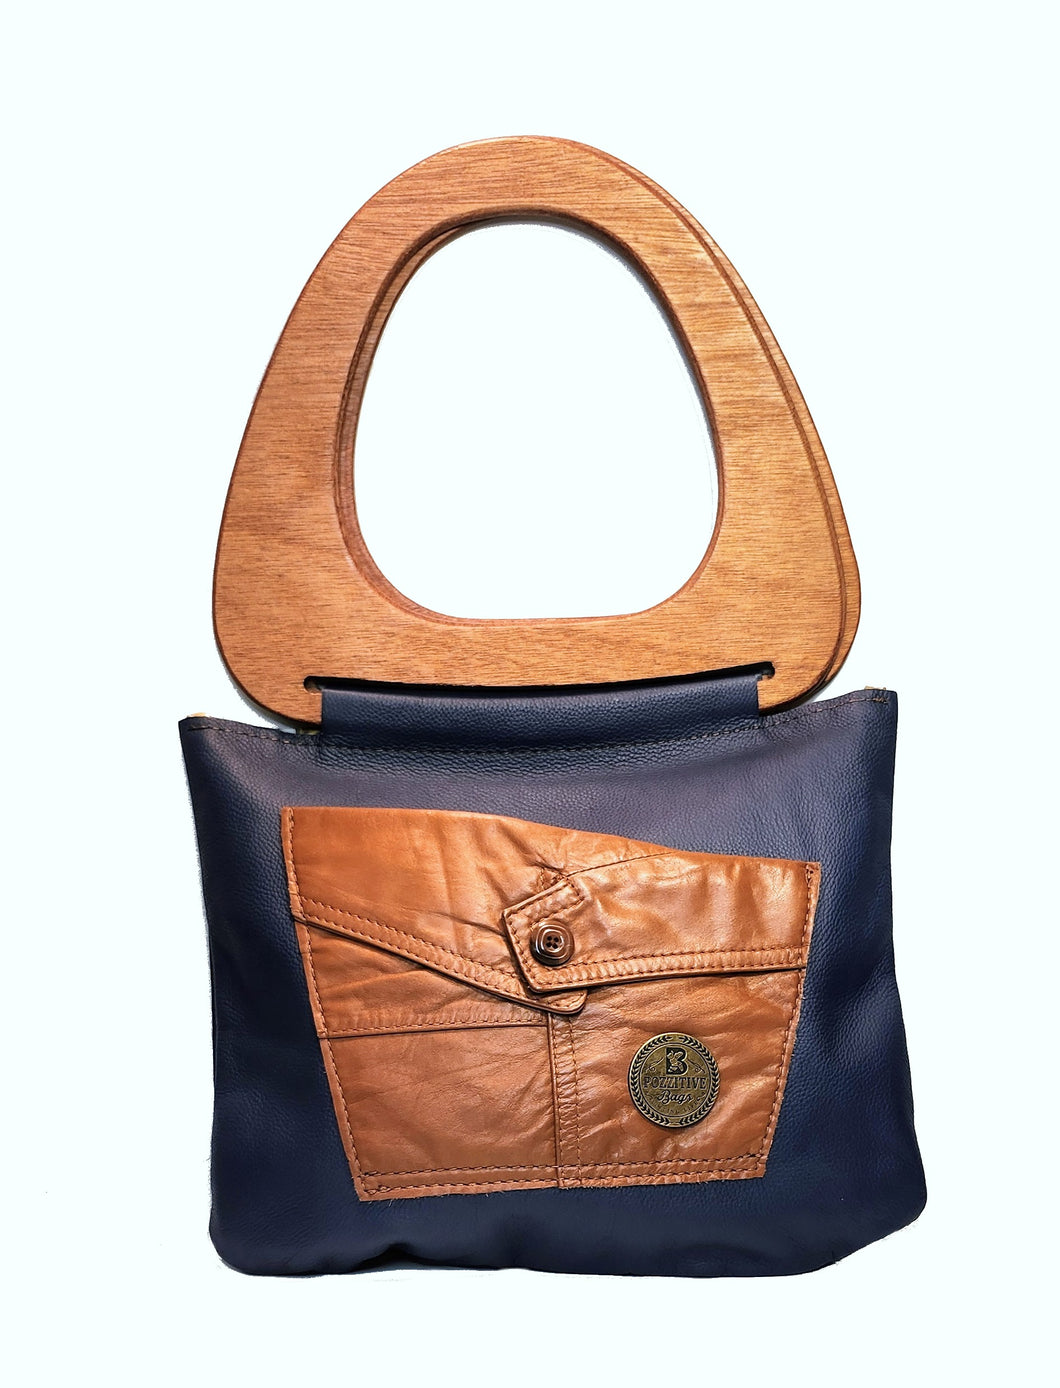 Handles of Wood Leather Bag